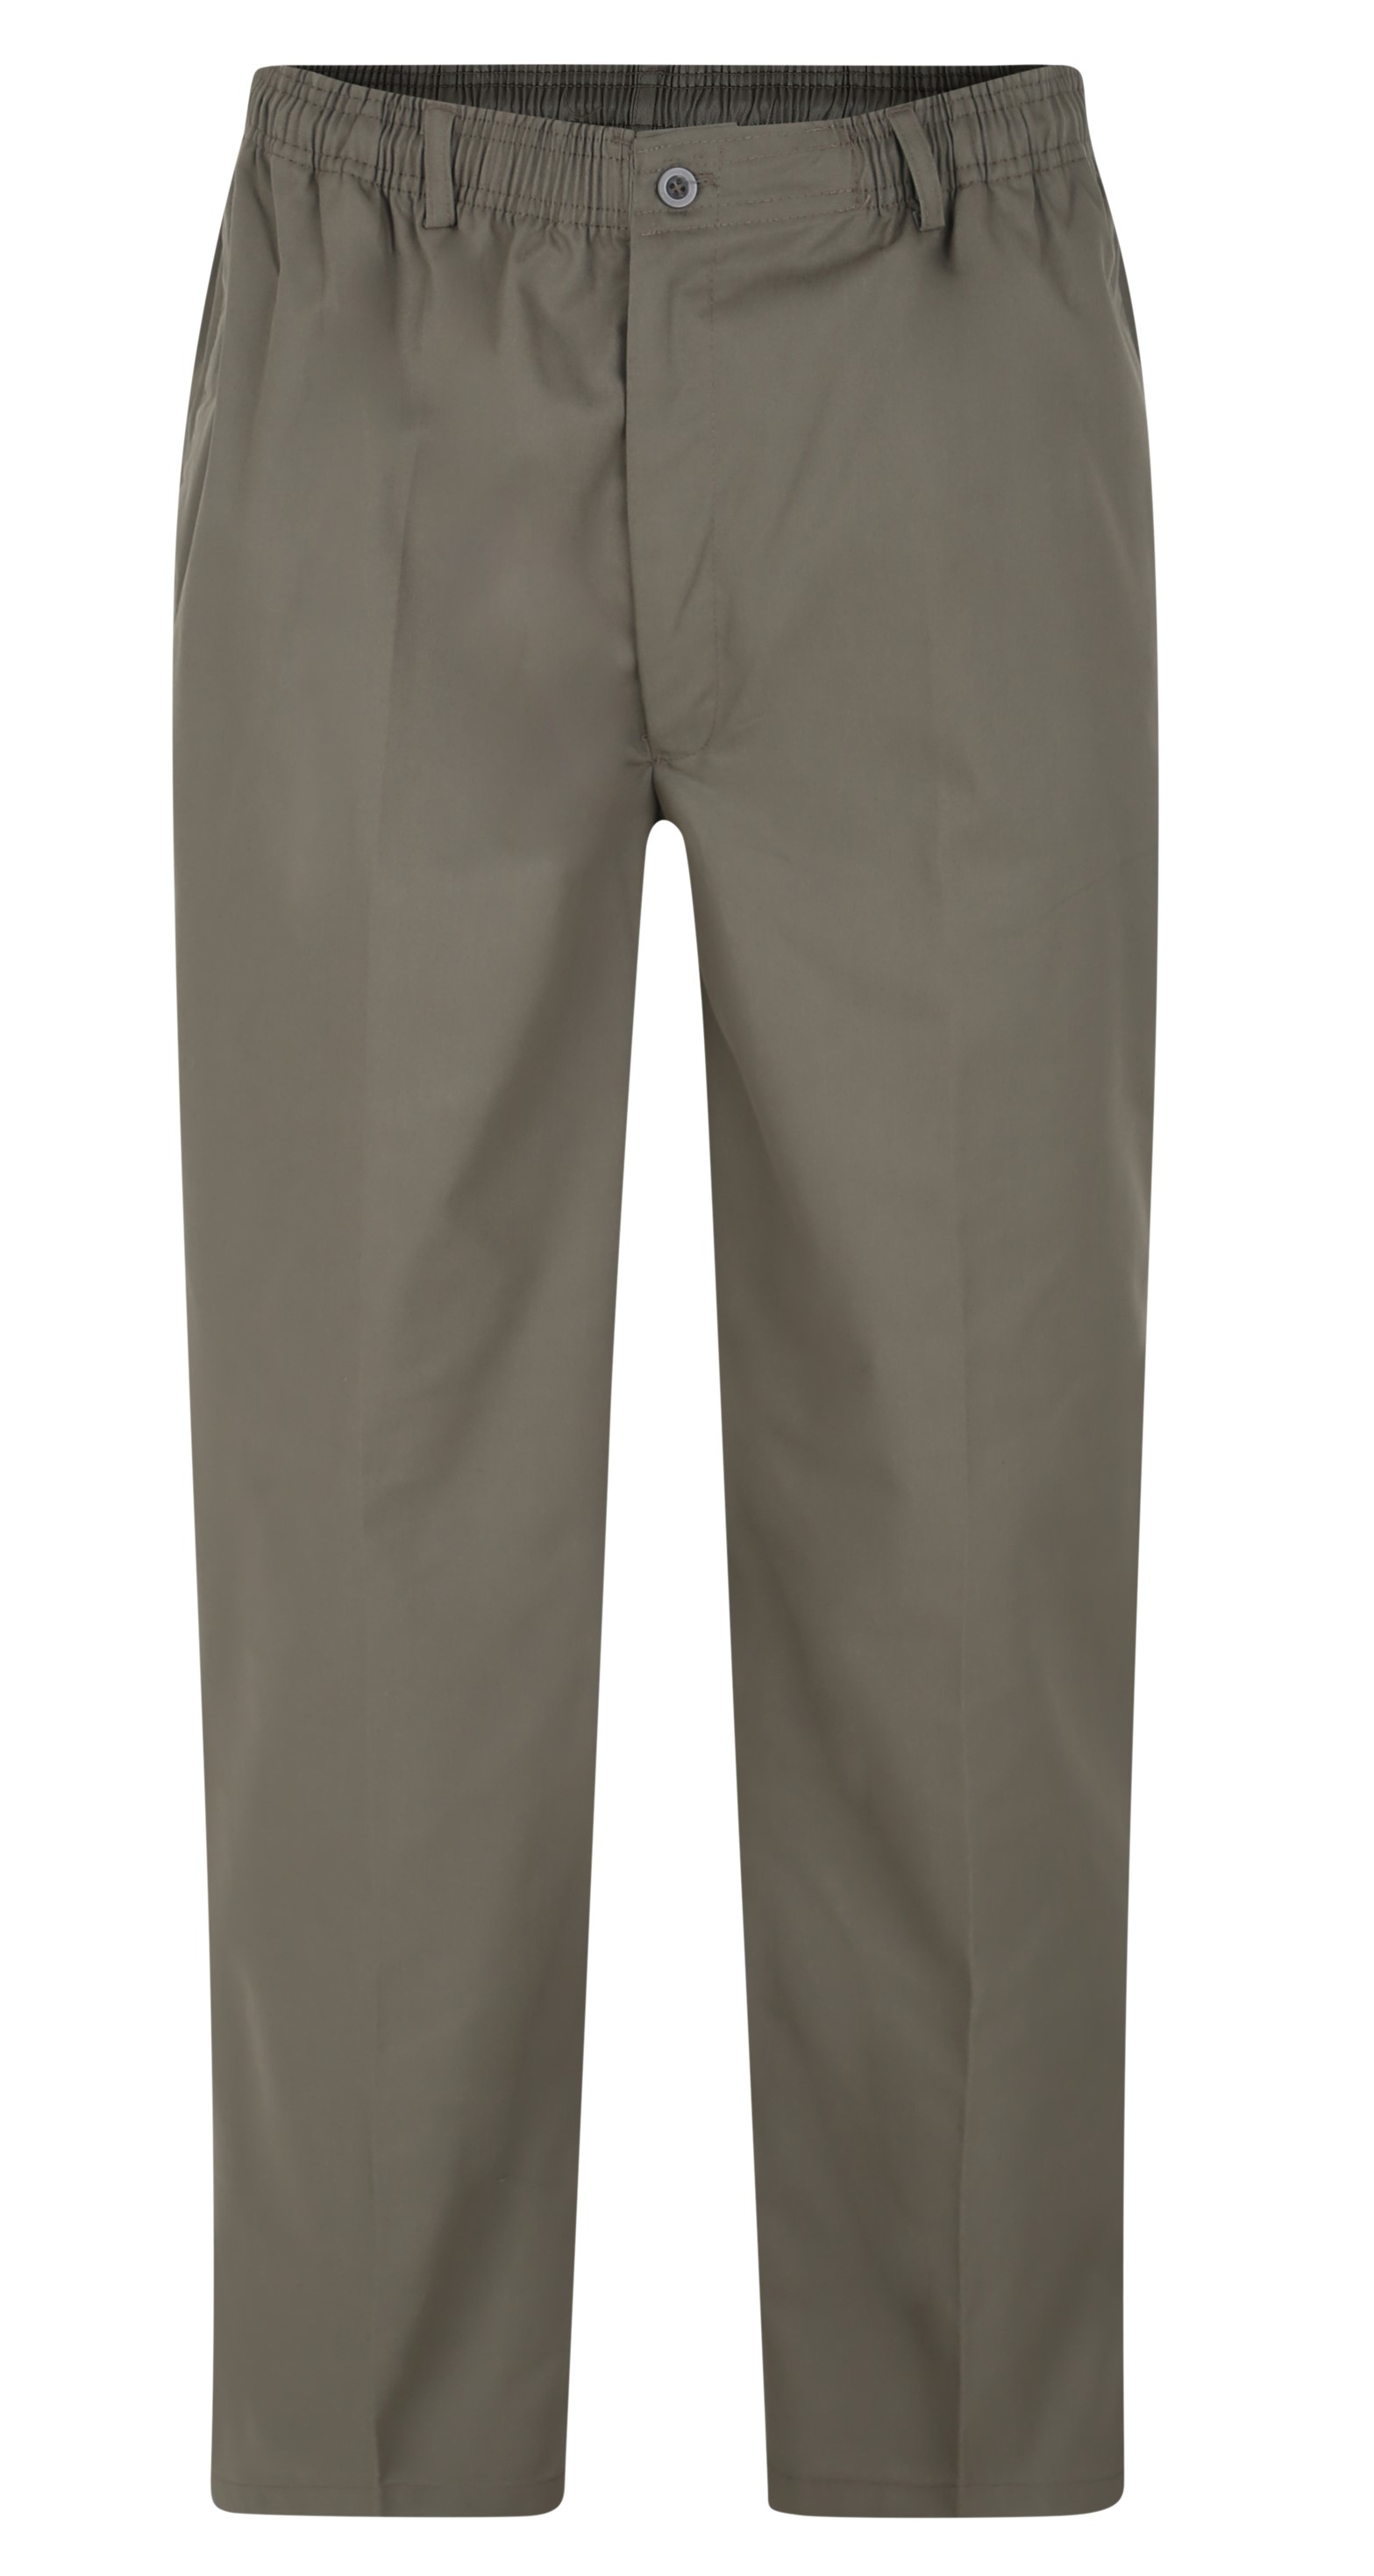 Dickers Trousers 44 inch Waist BNWT  Shop for Shelter